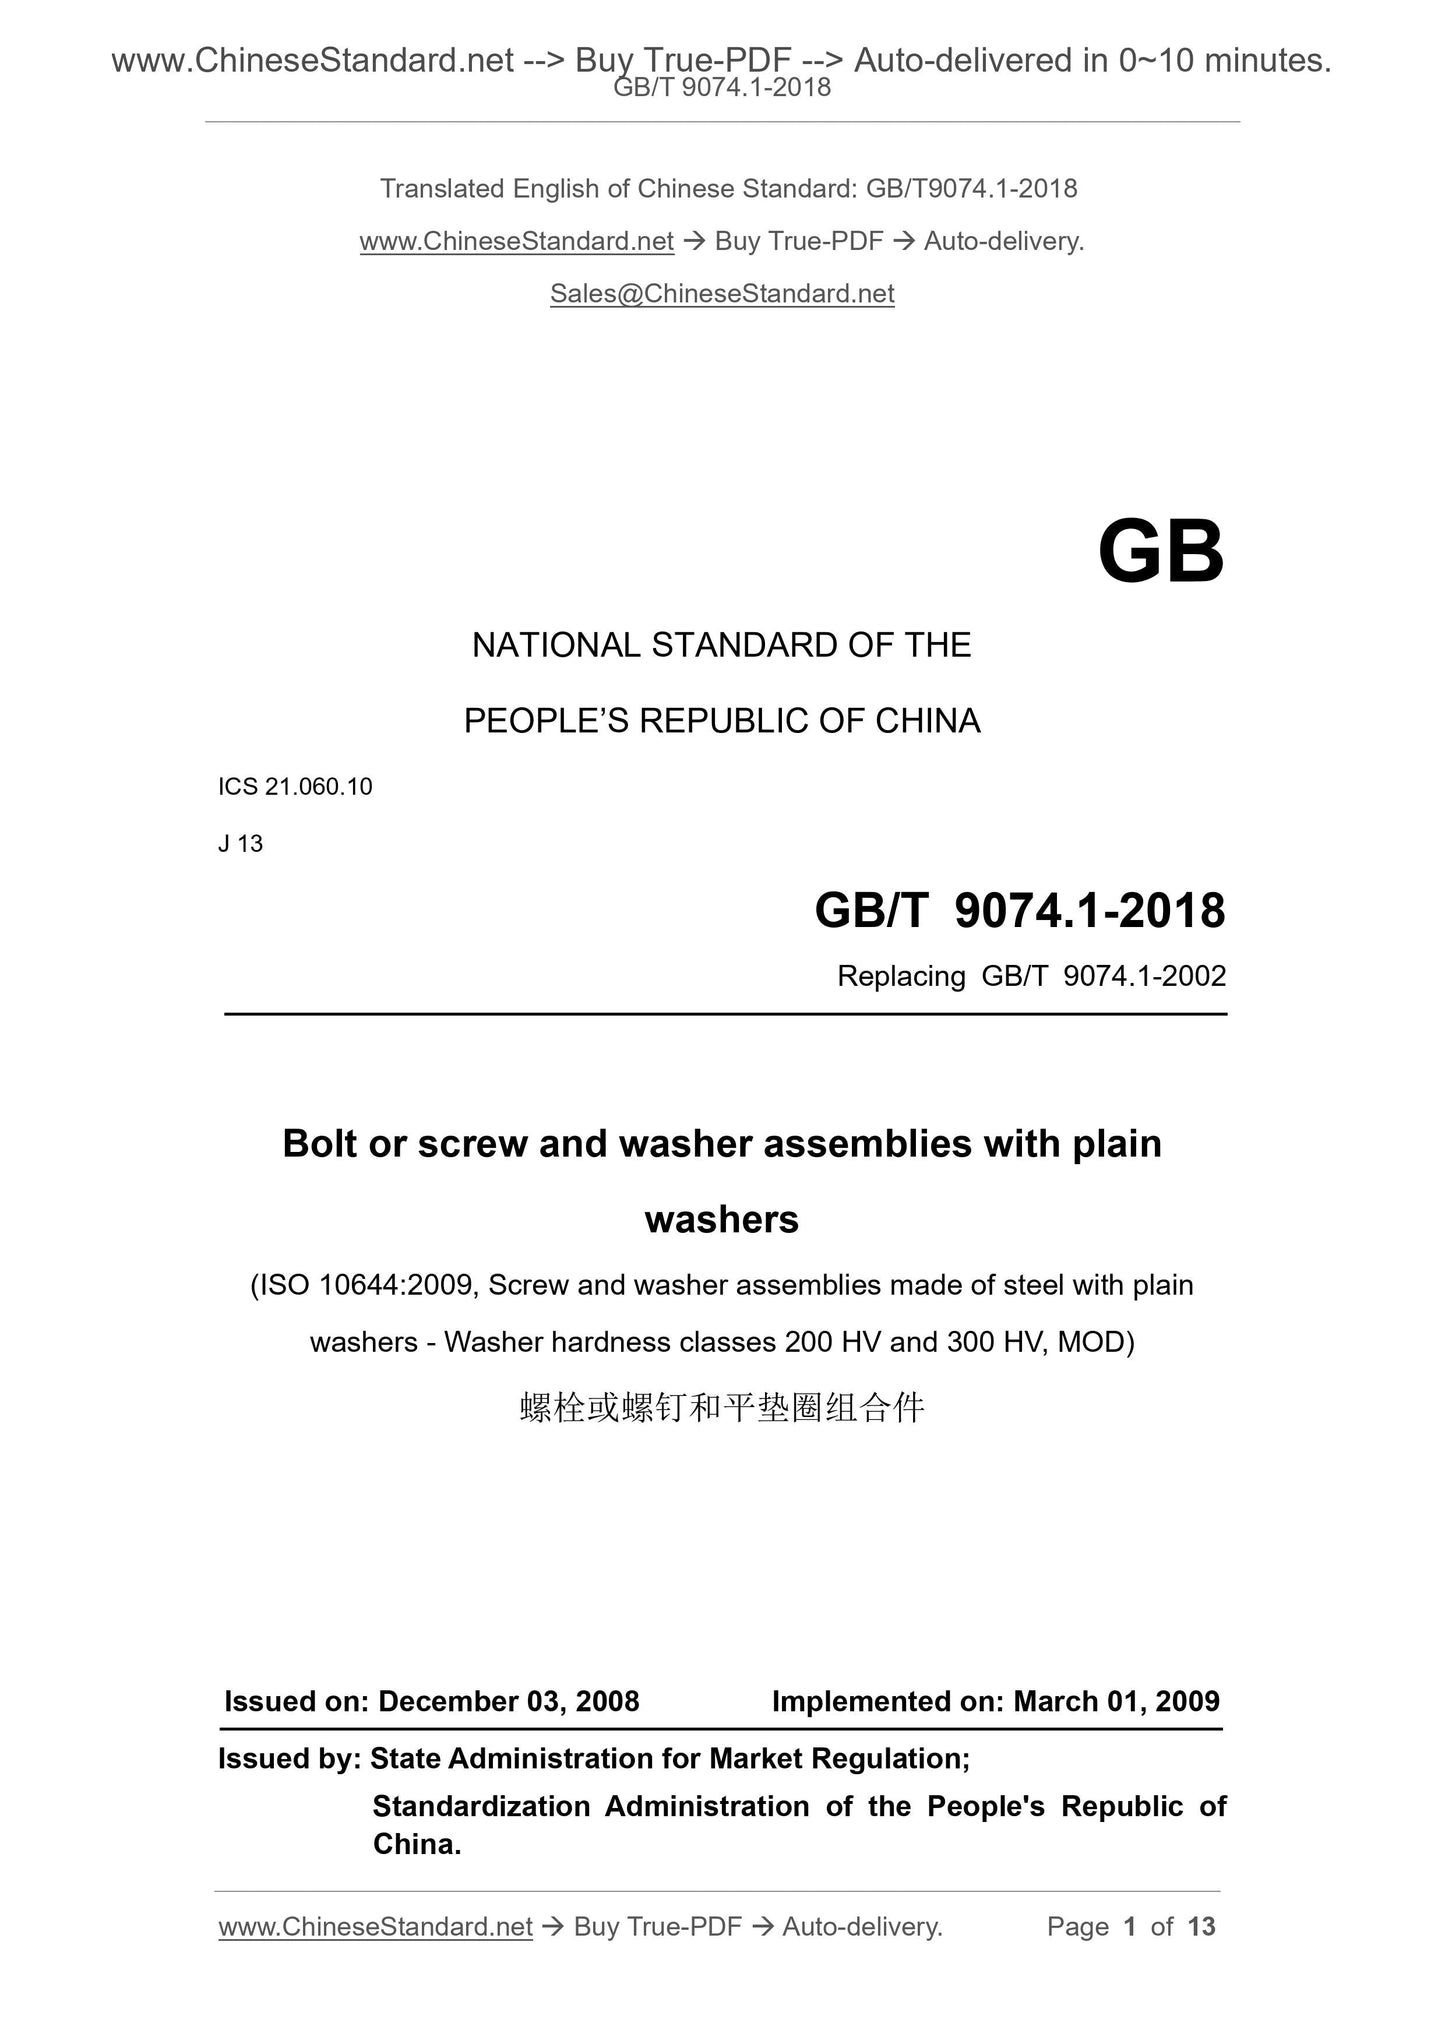 GB/T 9074.1-2018 Page 1